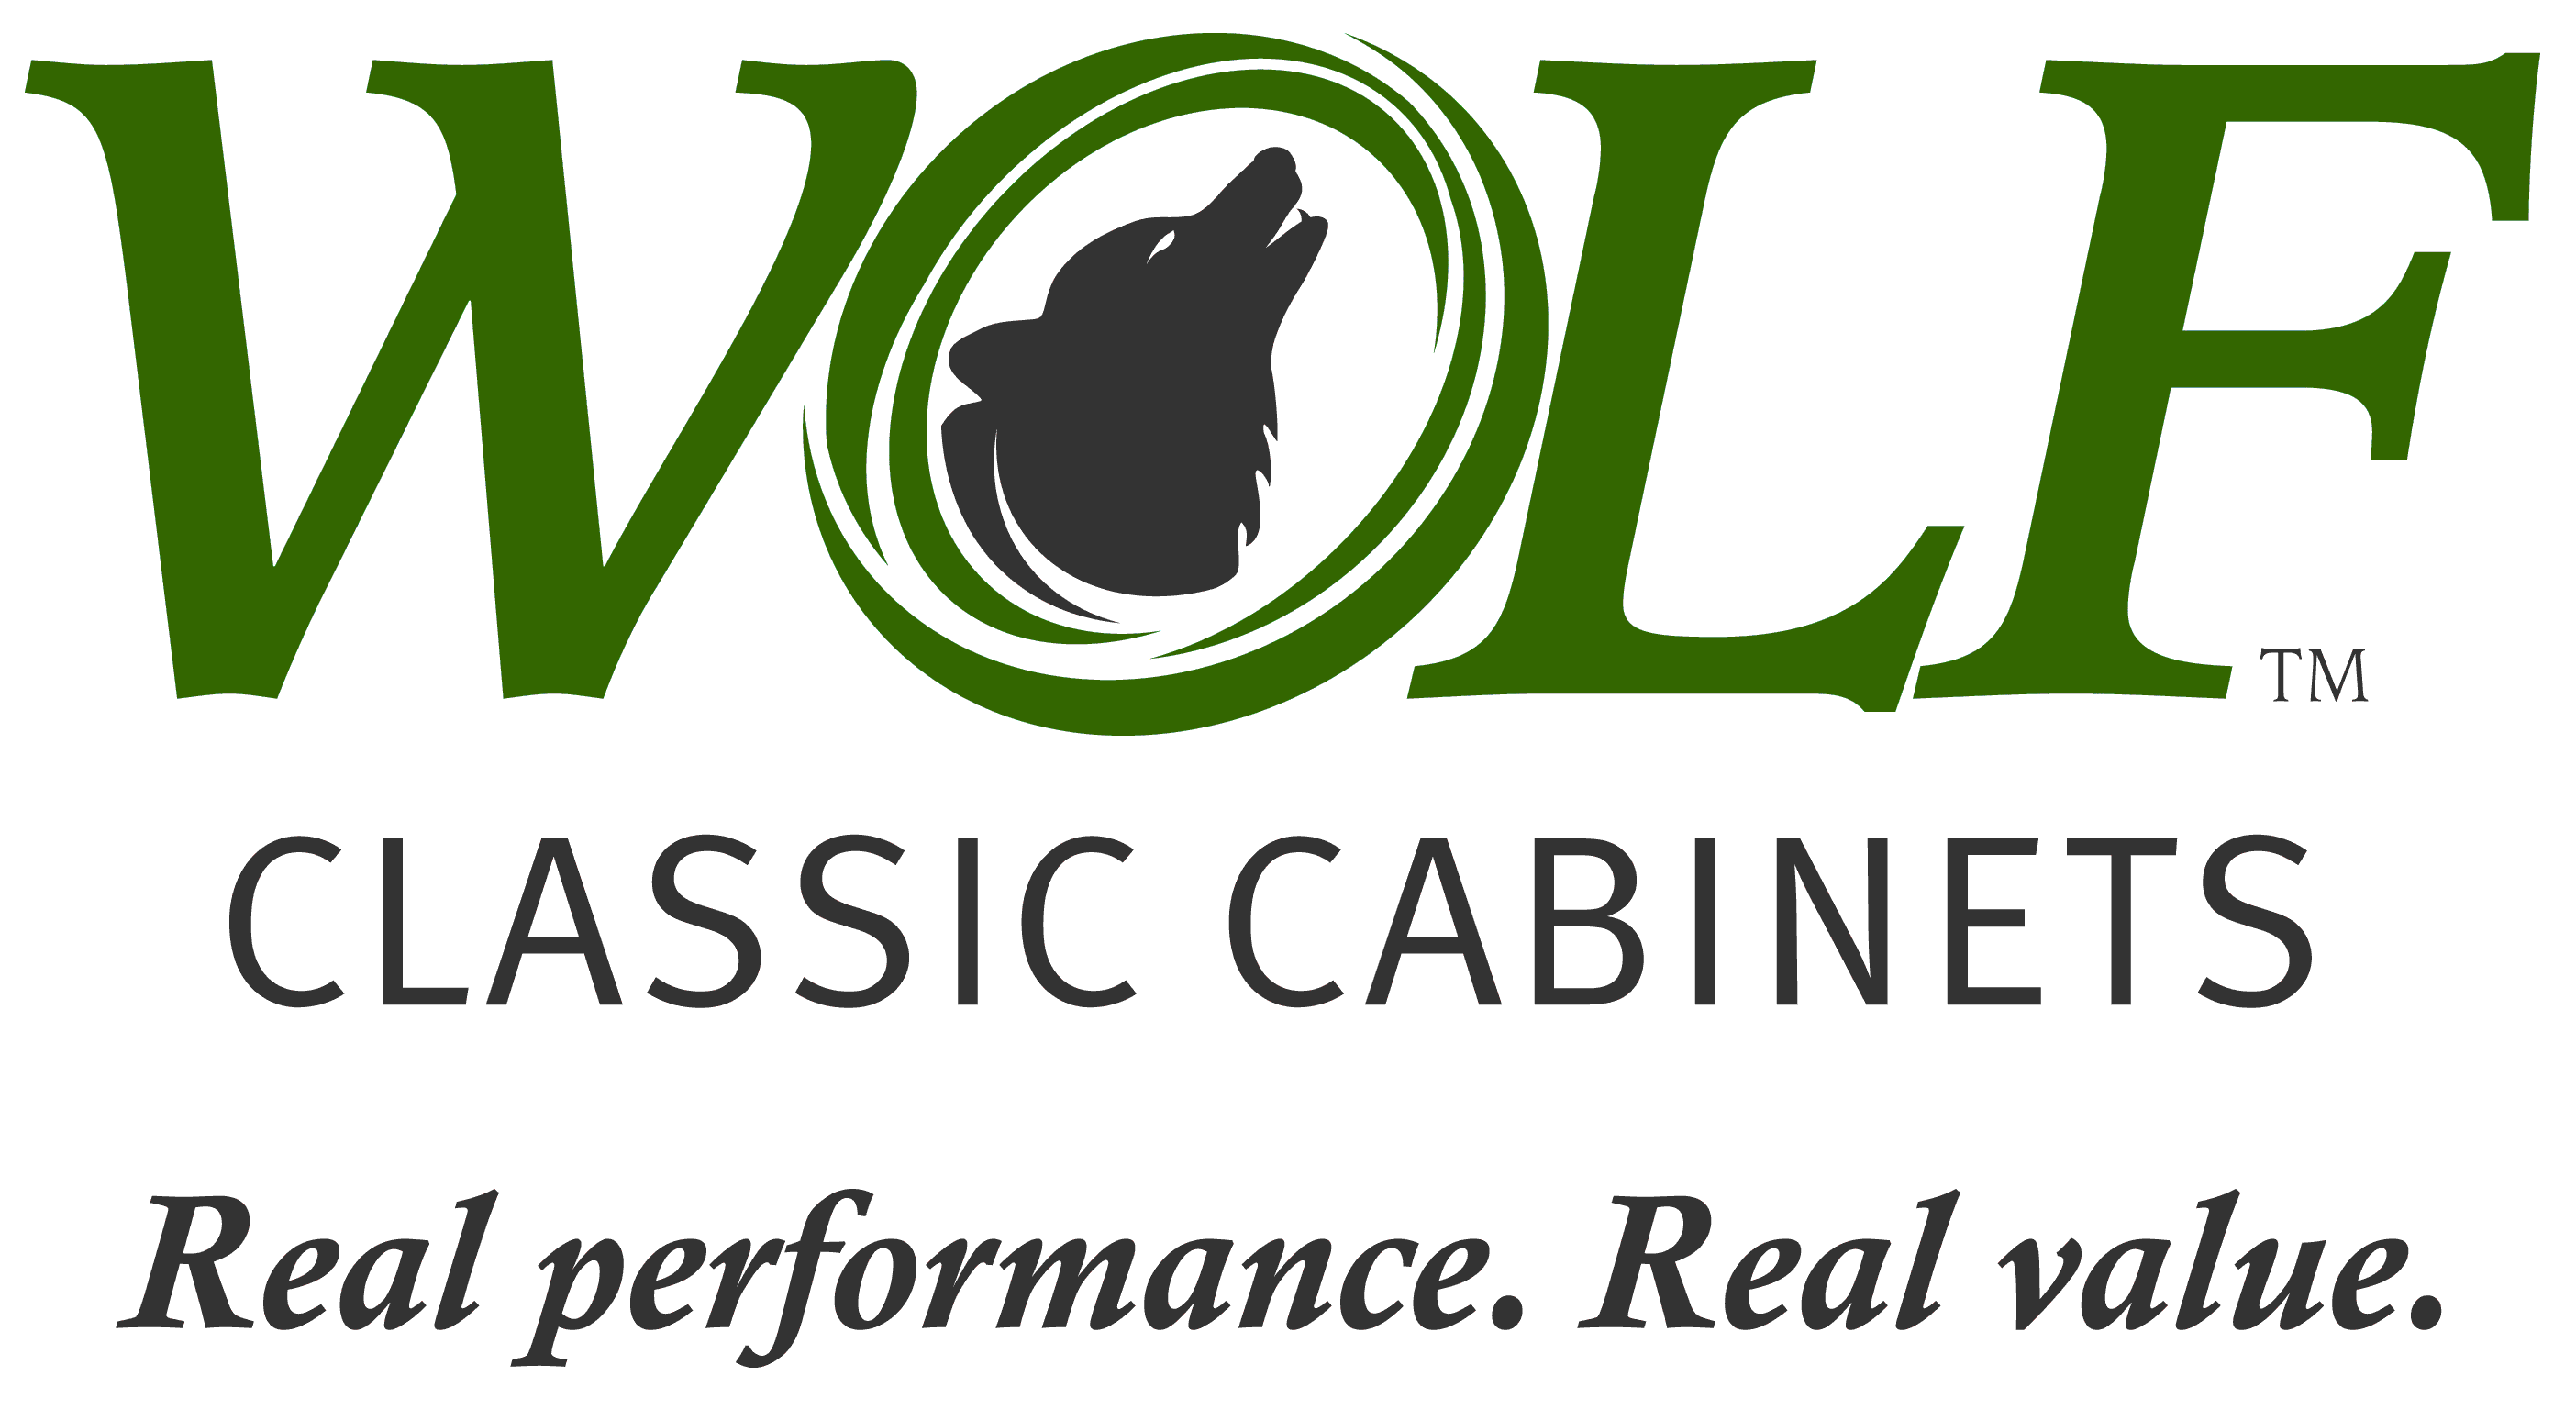 Wolf Classic Cabinets Logo